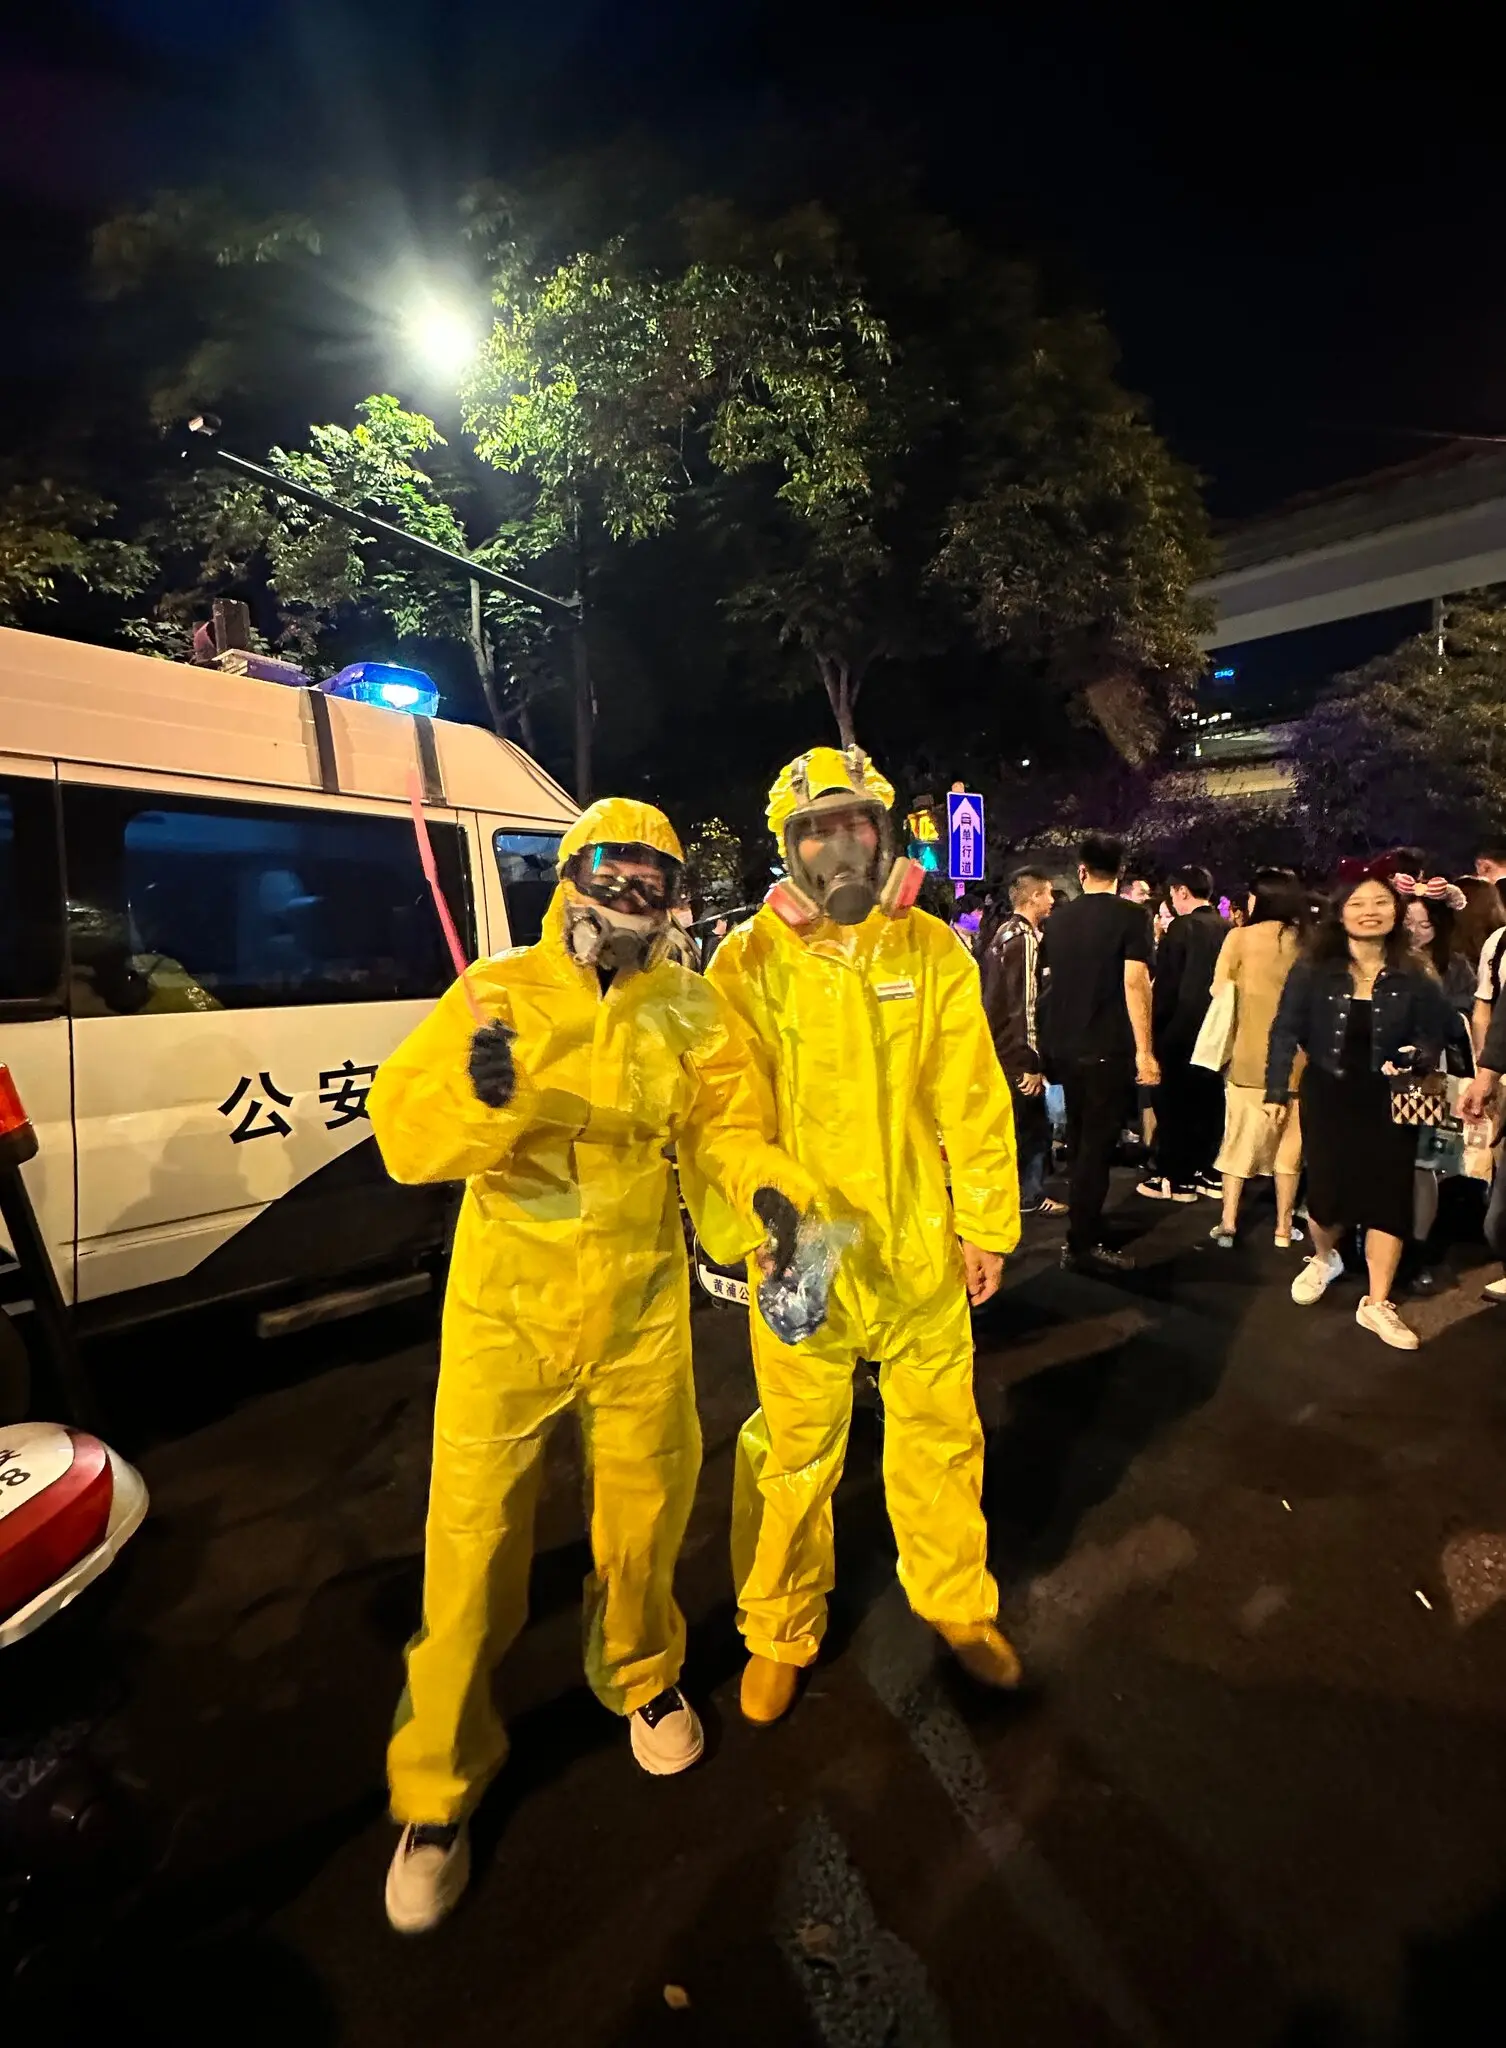 Two people dressed in yellow hazmat suits as characters from the TV show Breaking Bad, standing in front of a crowd and a police car.